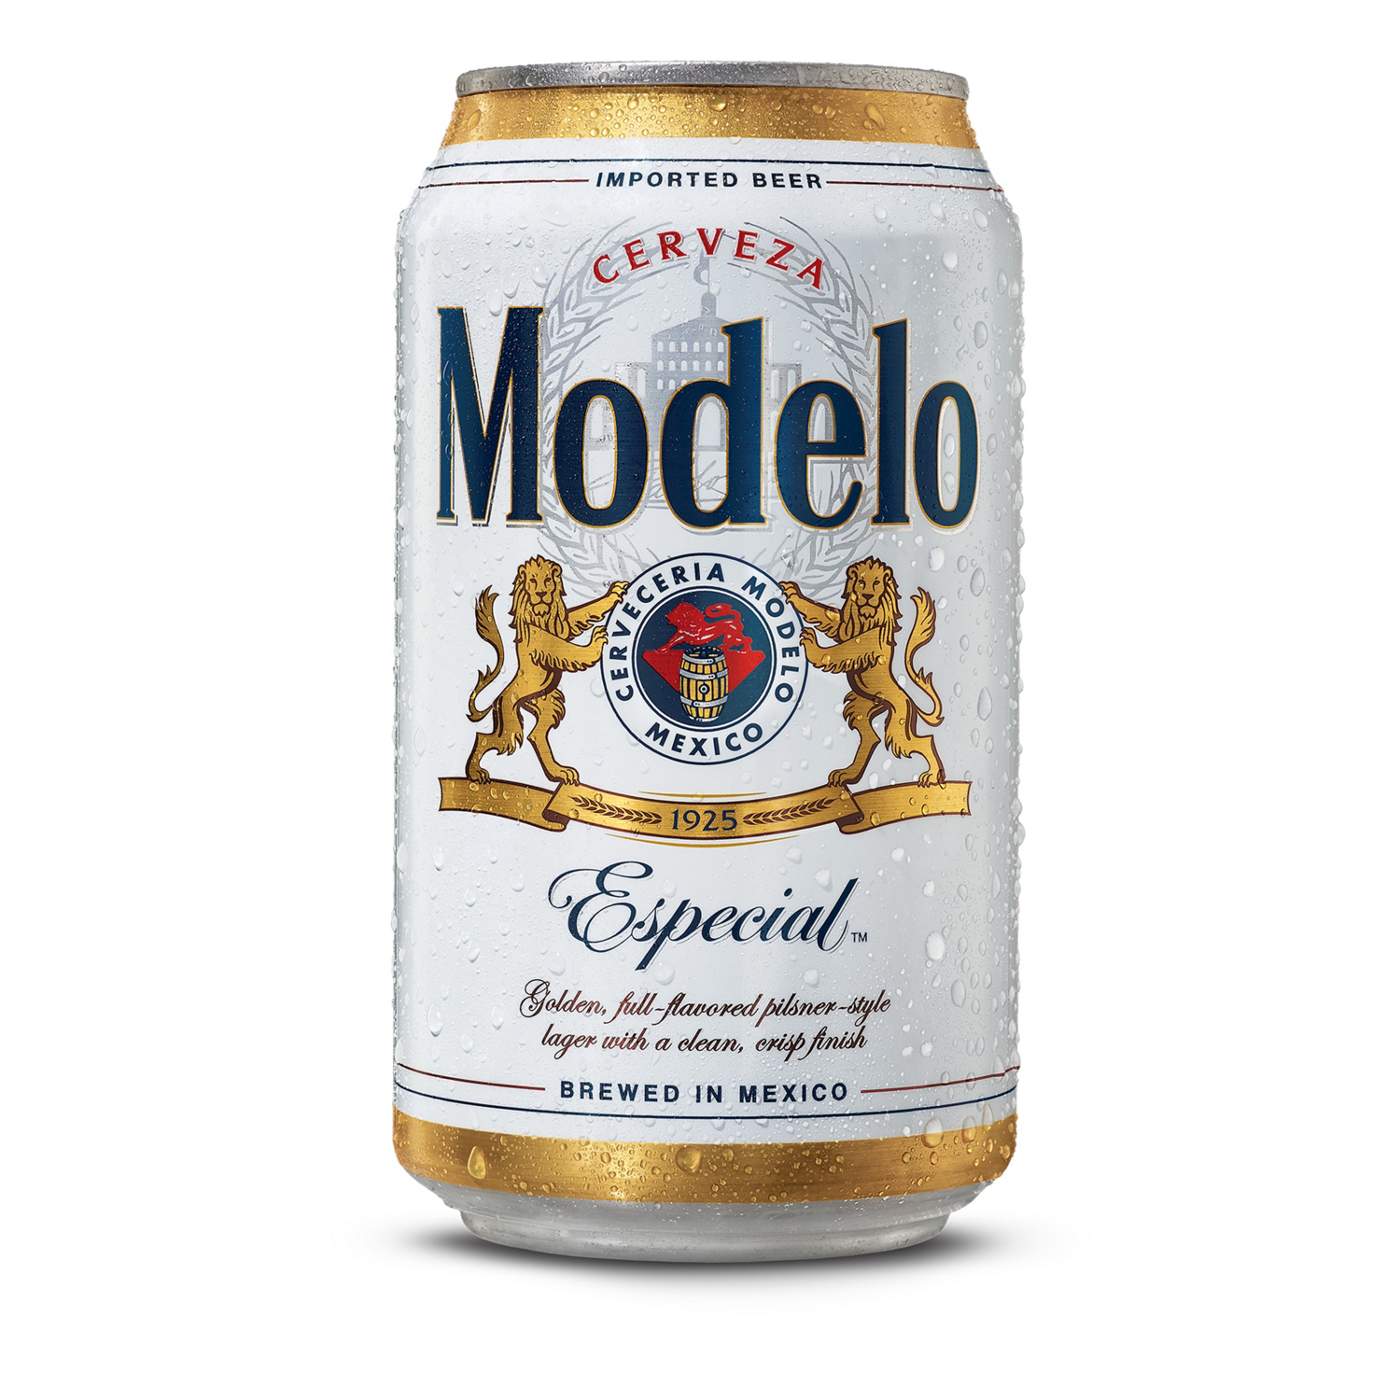 Modelo Especial Mexican Lager Import Beer 12 oz Cans, 18 pk; image 10 of 10